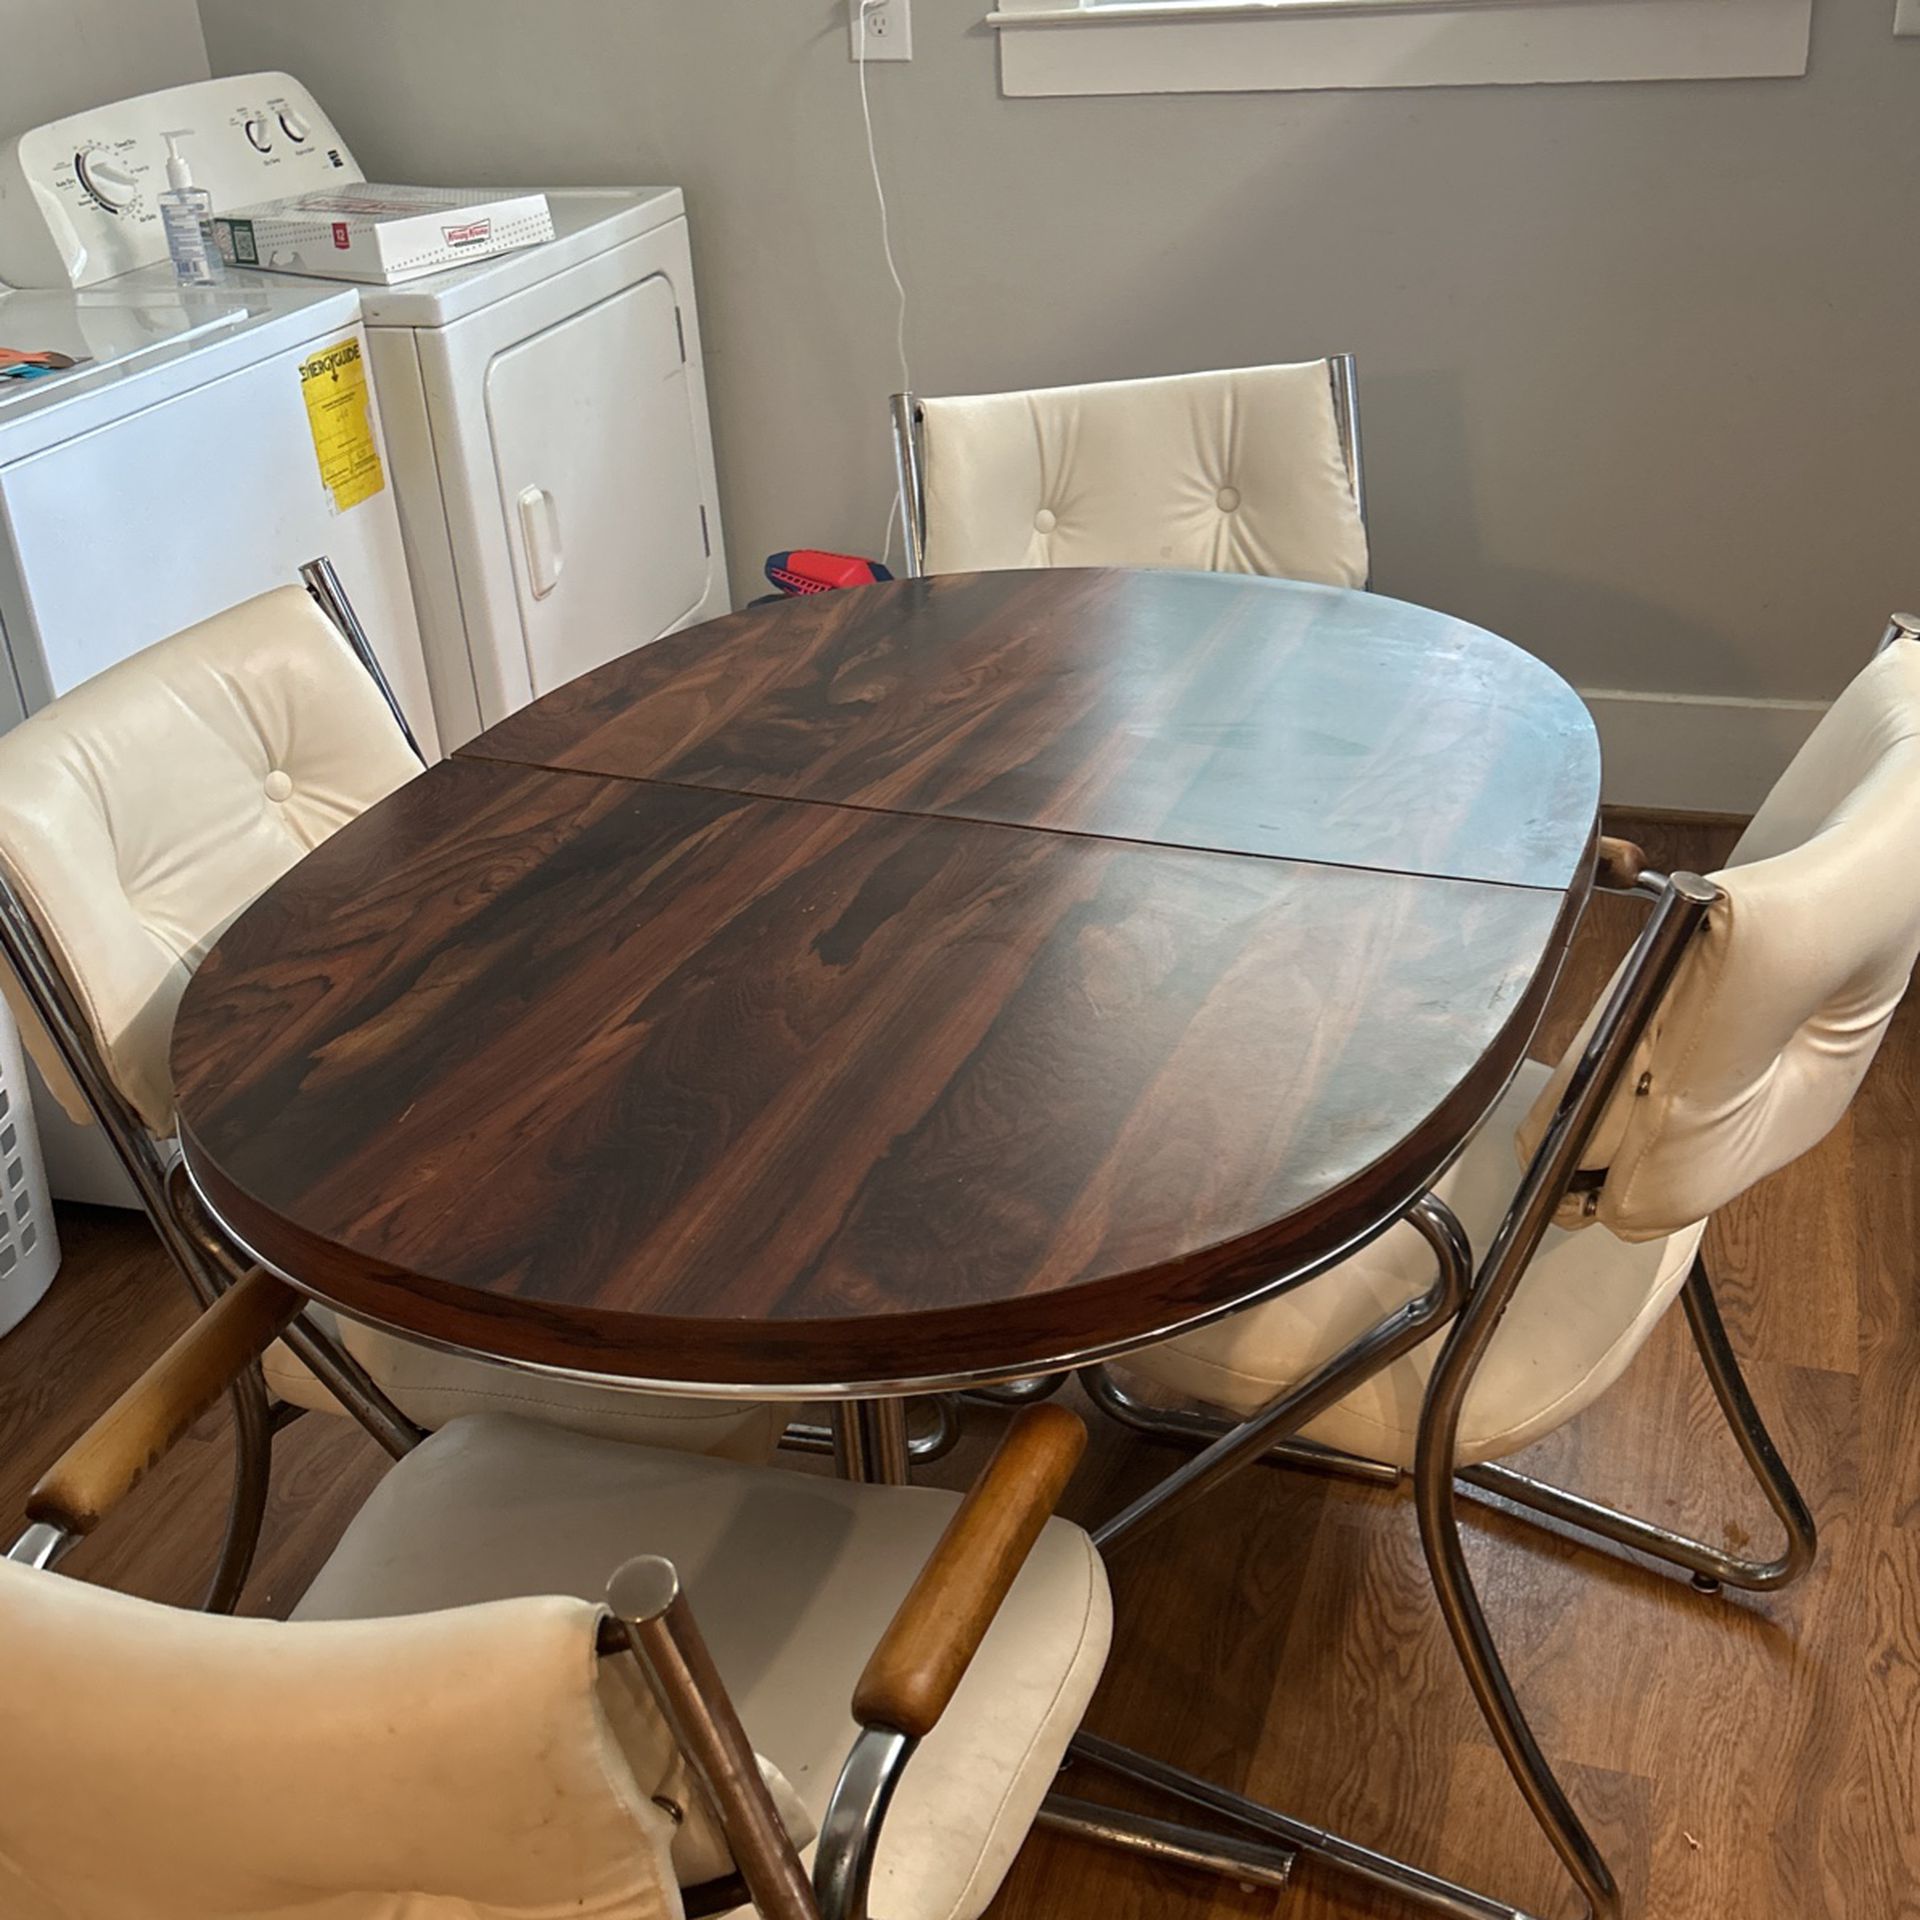 Classic Wooden Table With Extender  